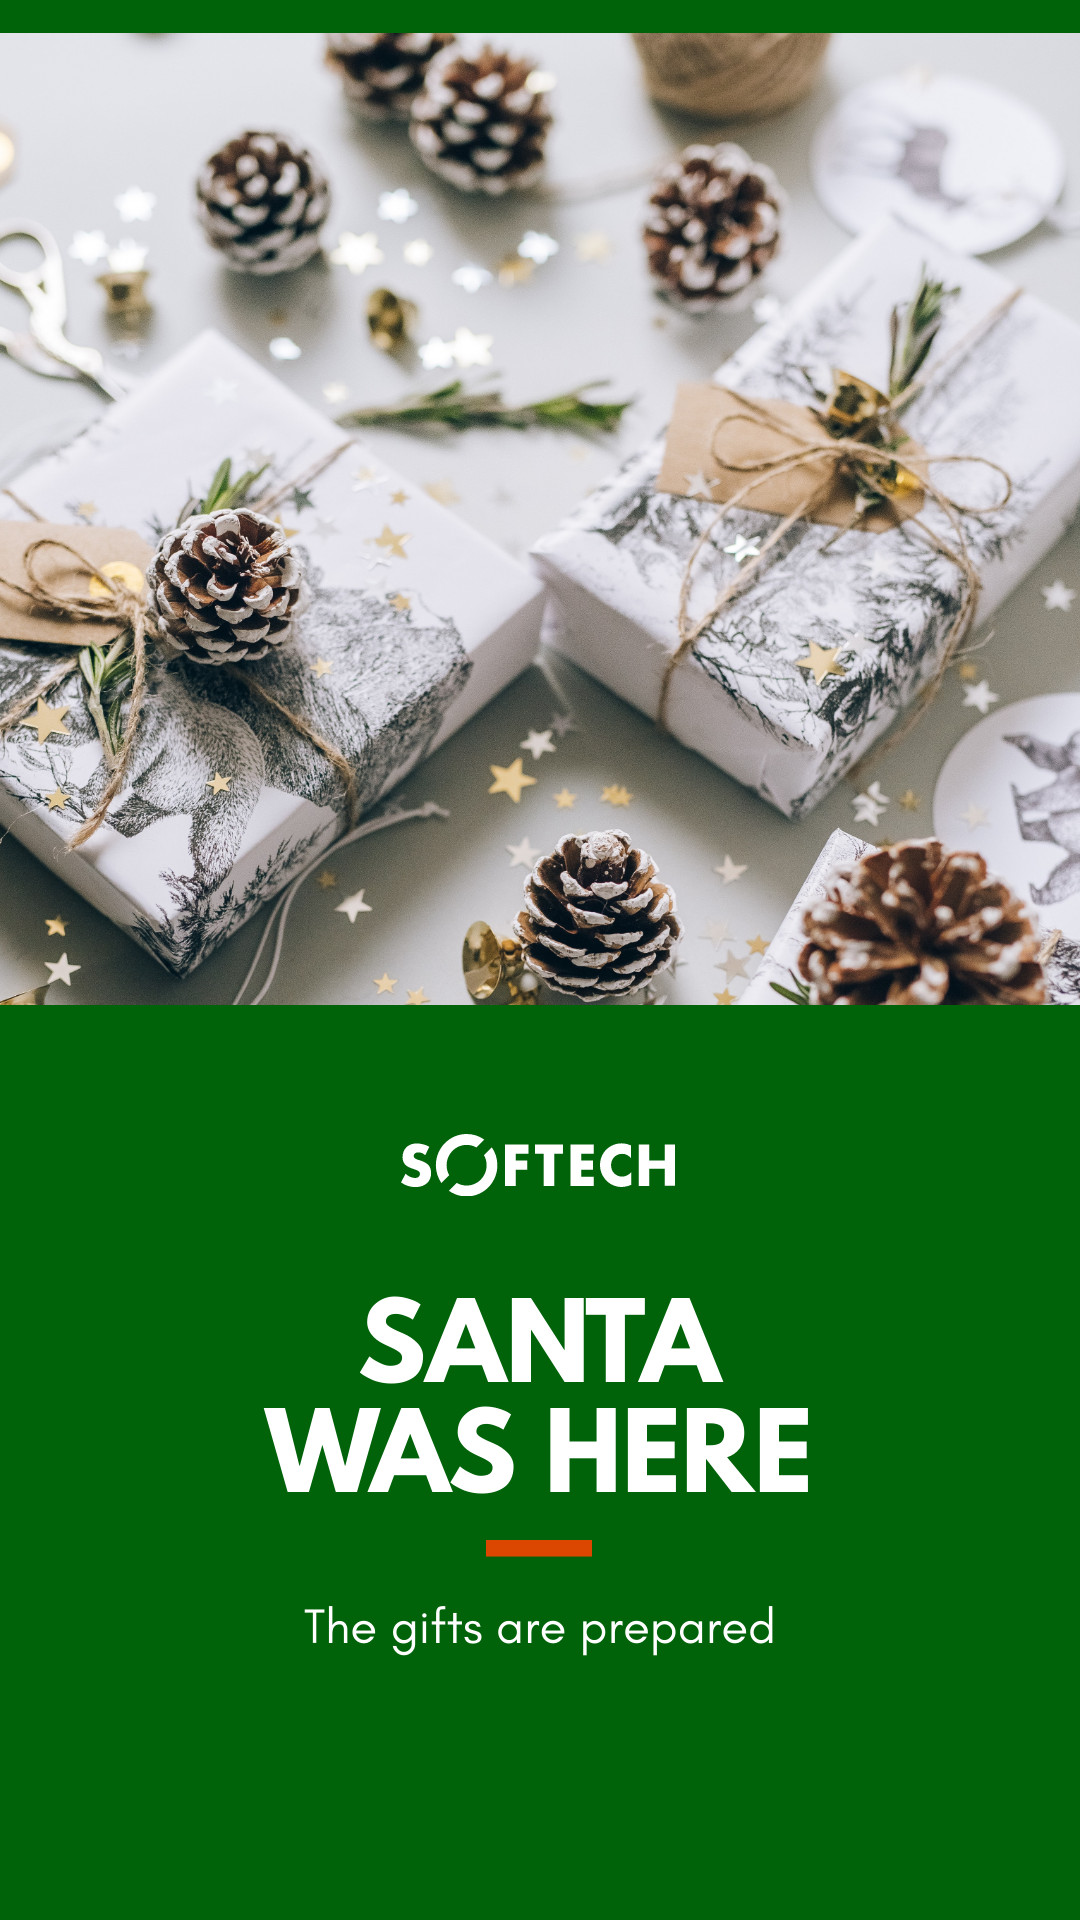 Santa Was Here Gifts Prepared Inline Rectangle 300x250